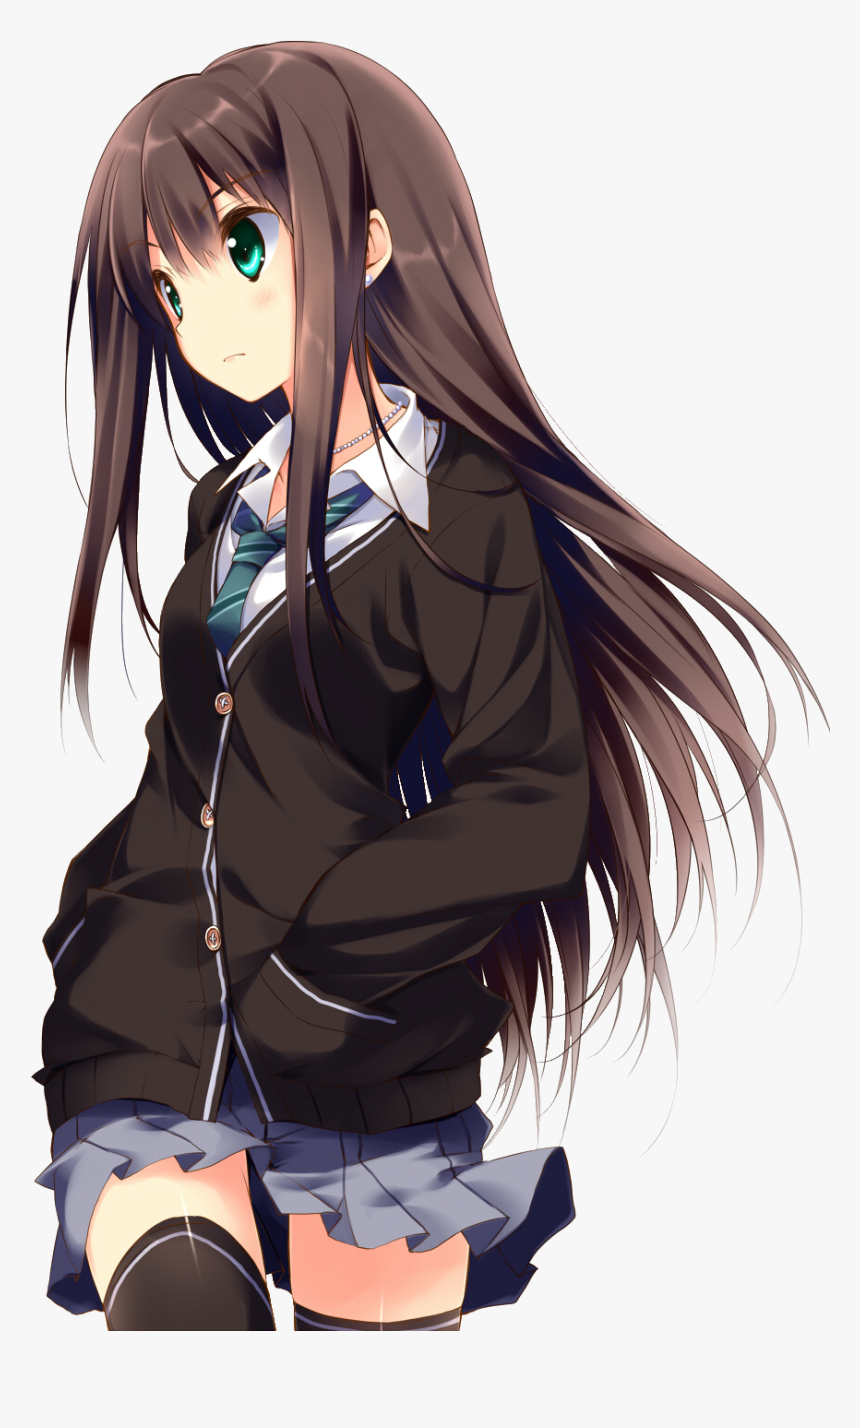 Anime Girl With Brown Hair And Blue Eyes Png 